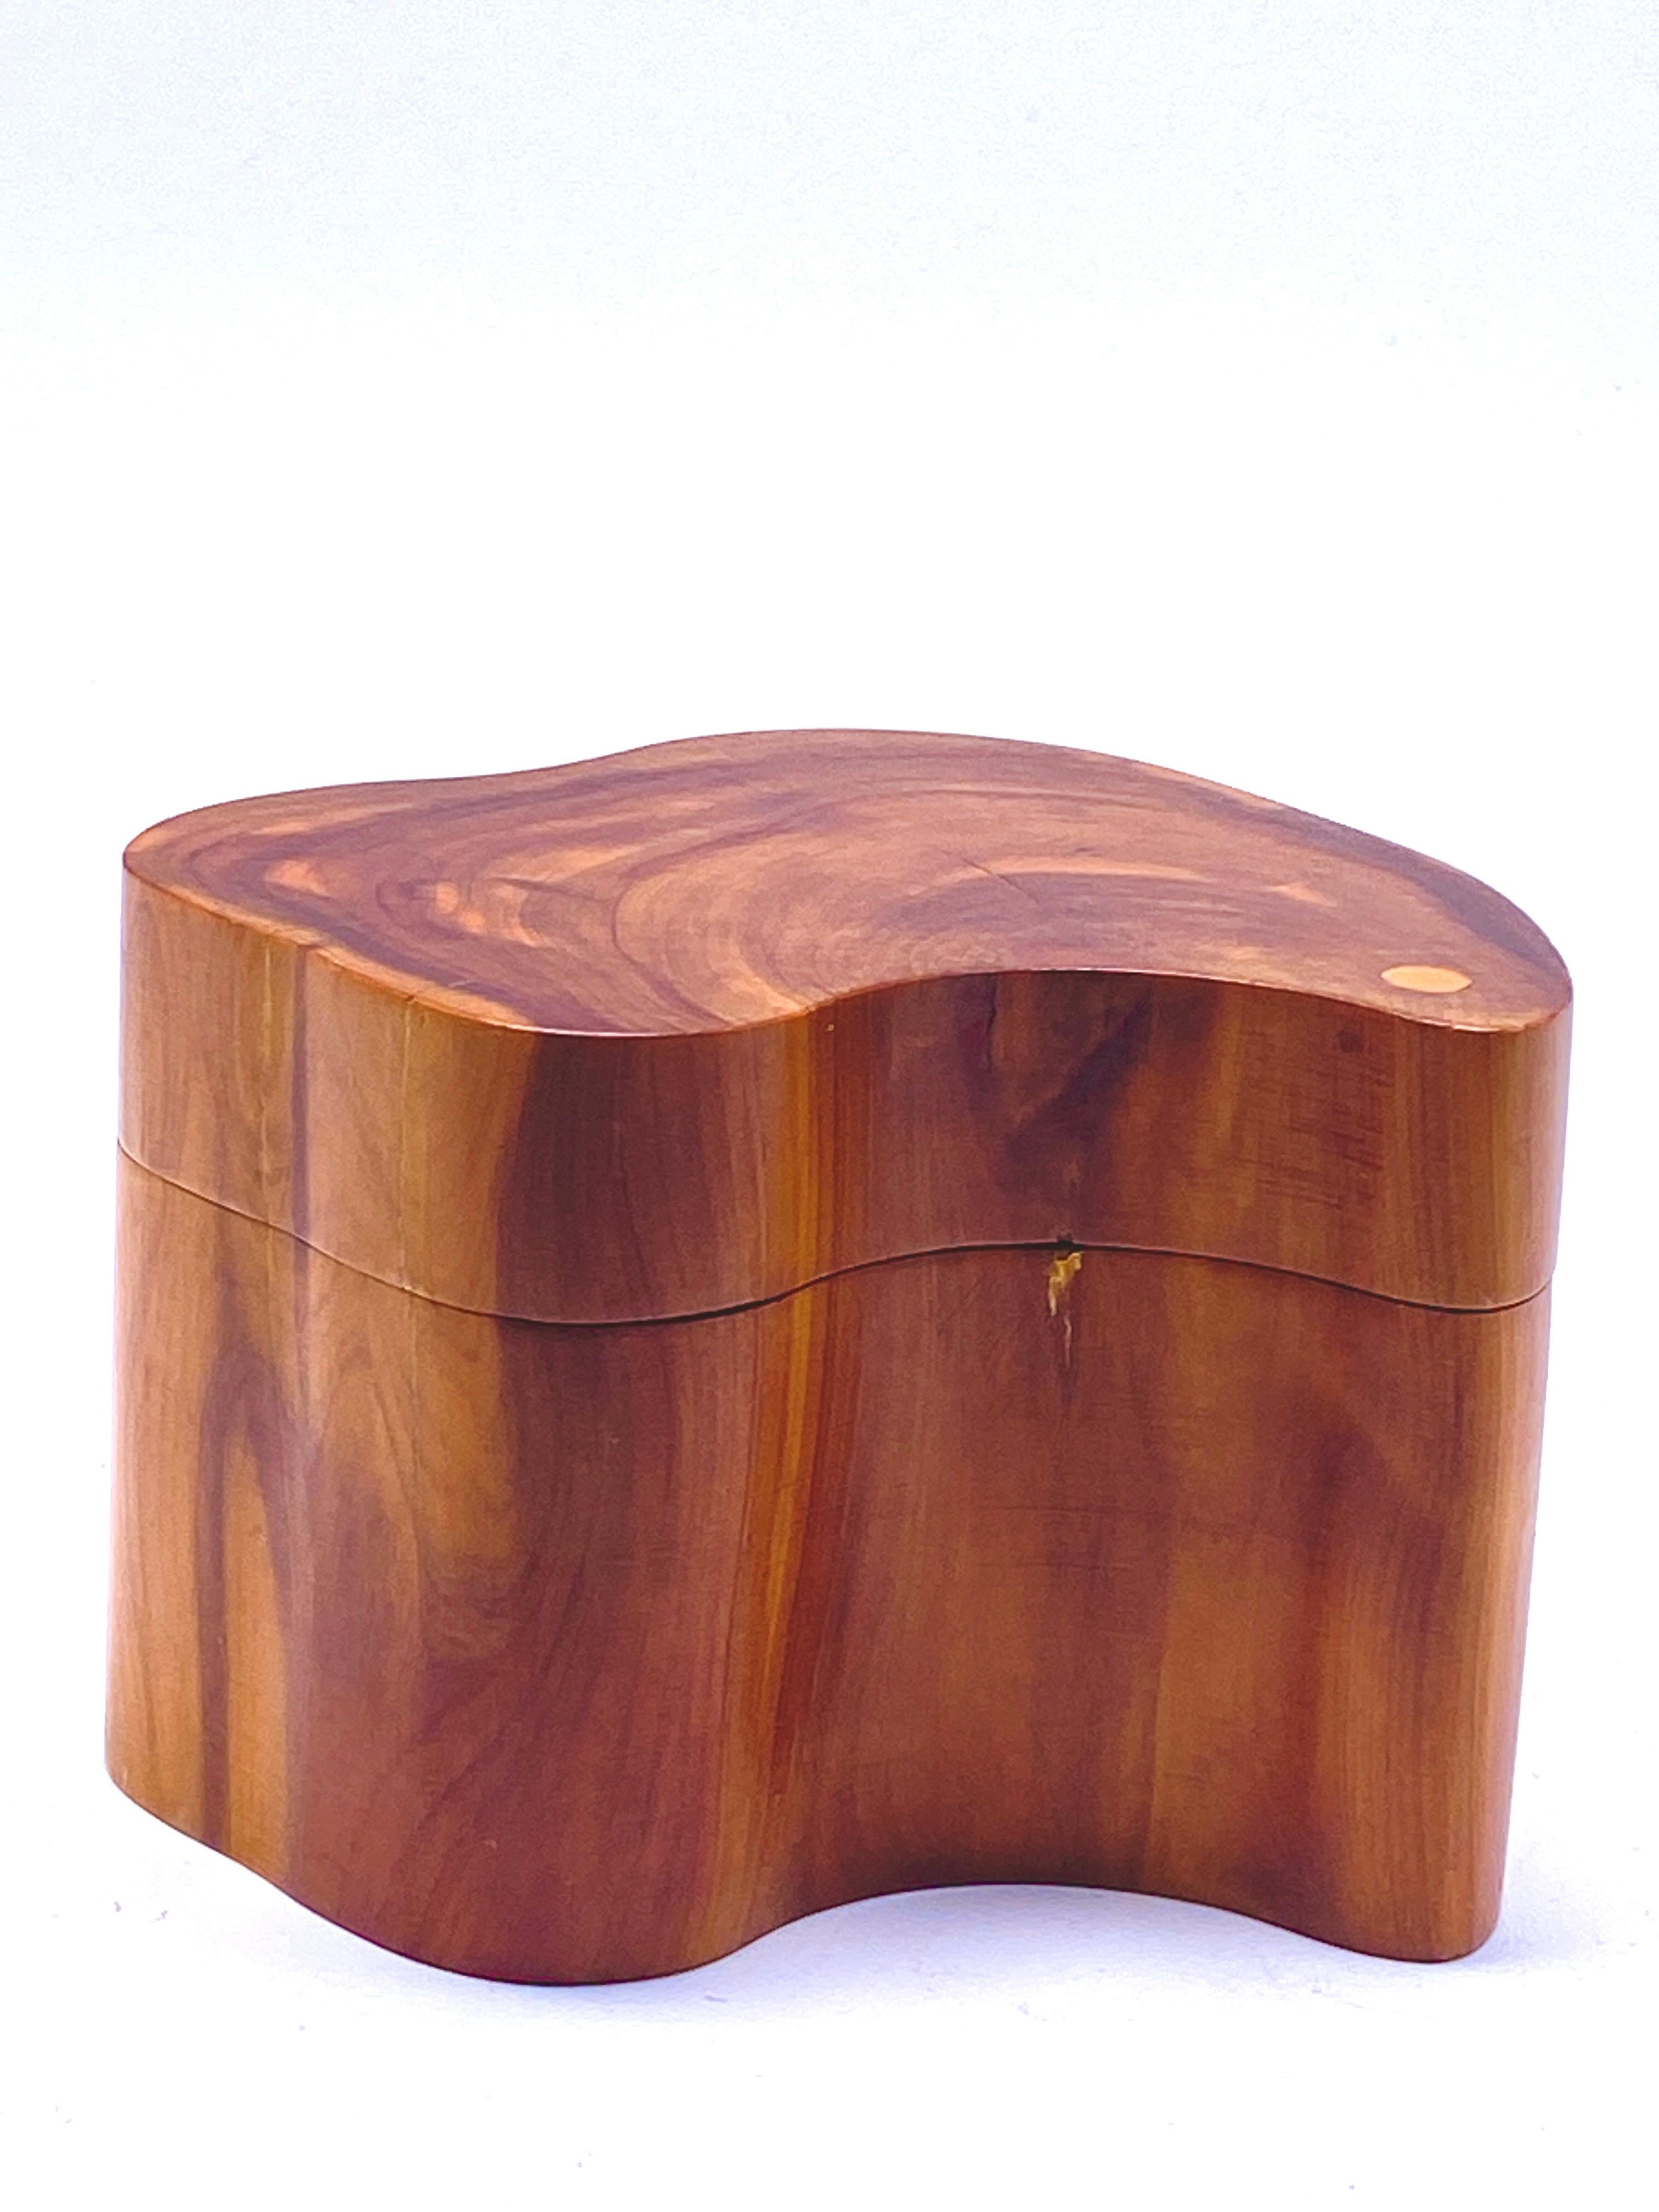 Box in olive wood, free-form. With a lid that turns and can be removed from the base of the box. The shape of this box is free and sinuous, which makes it very original and rare. There are noon so far, the day I put this announcement on the web